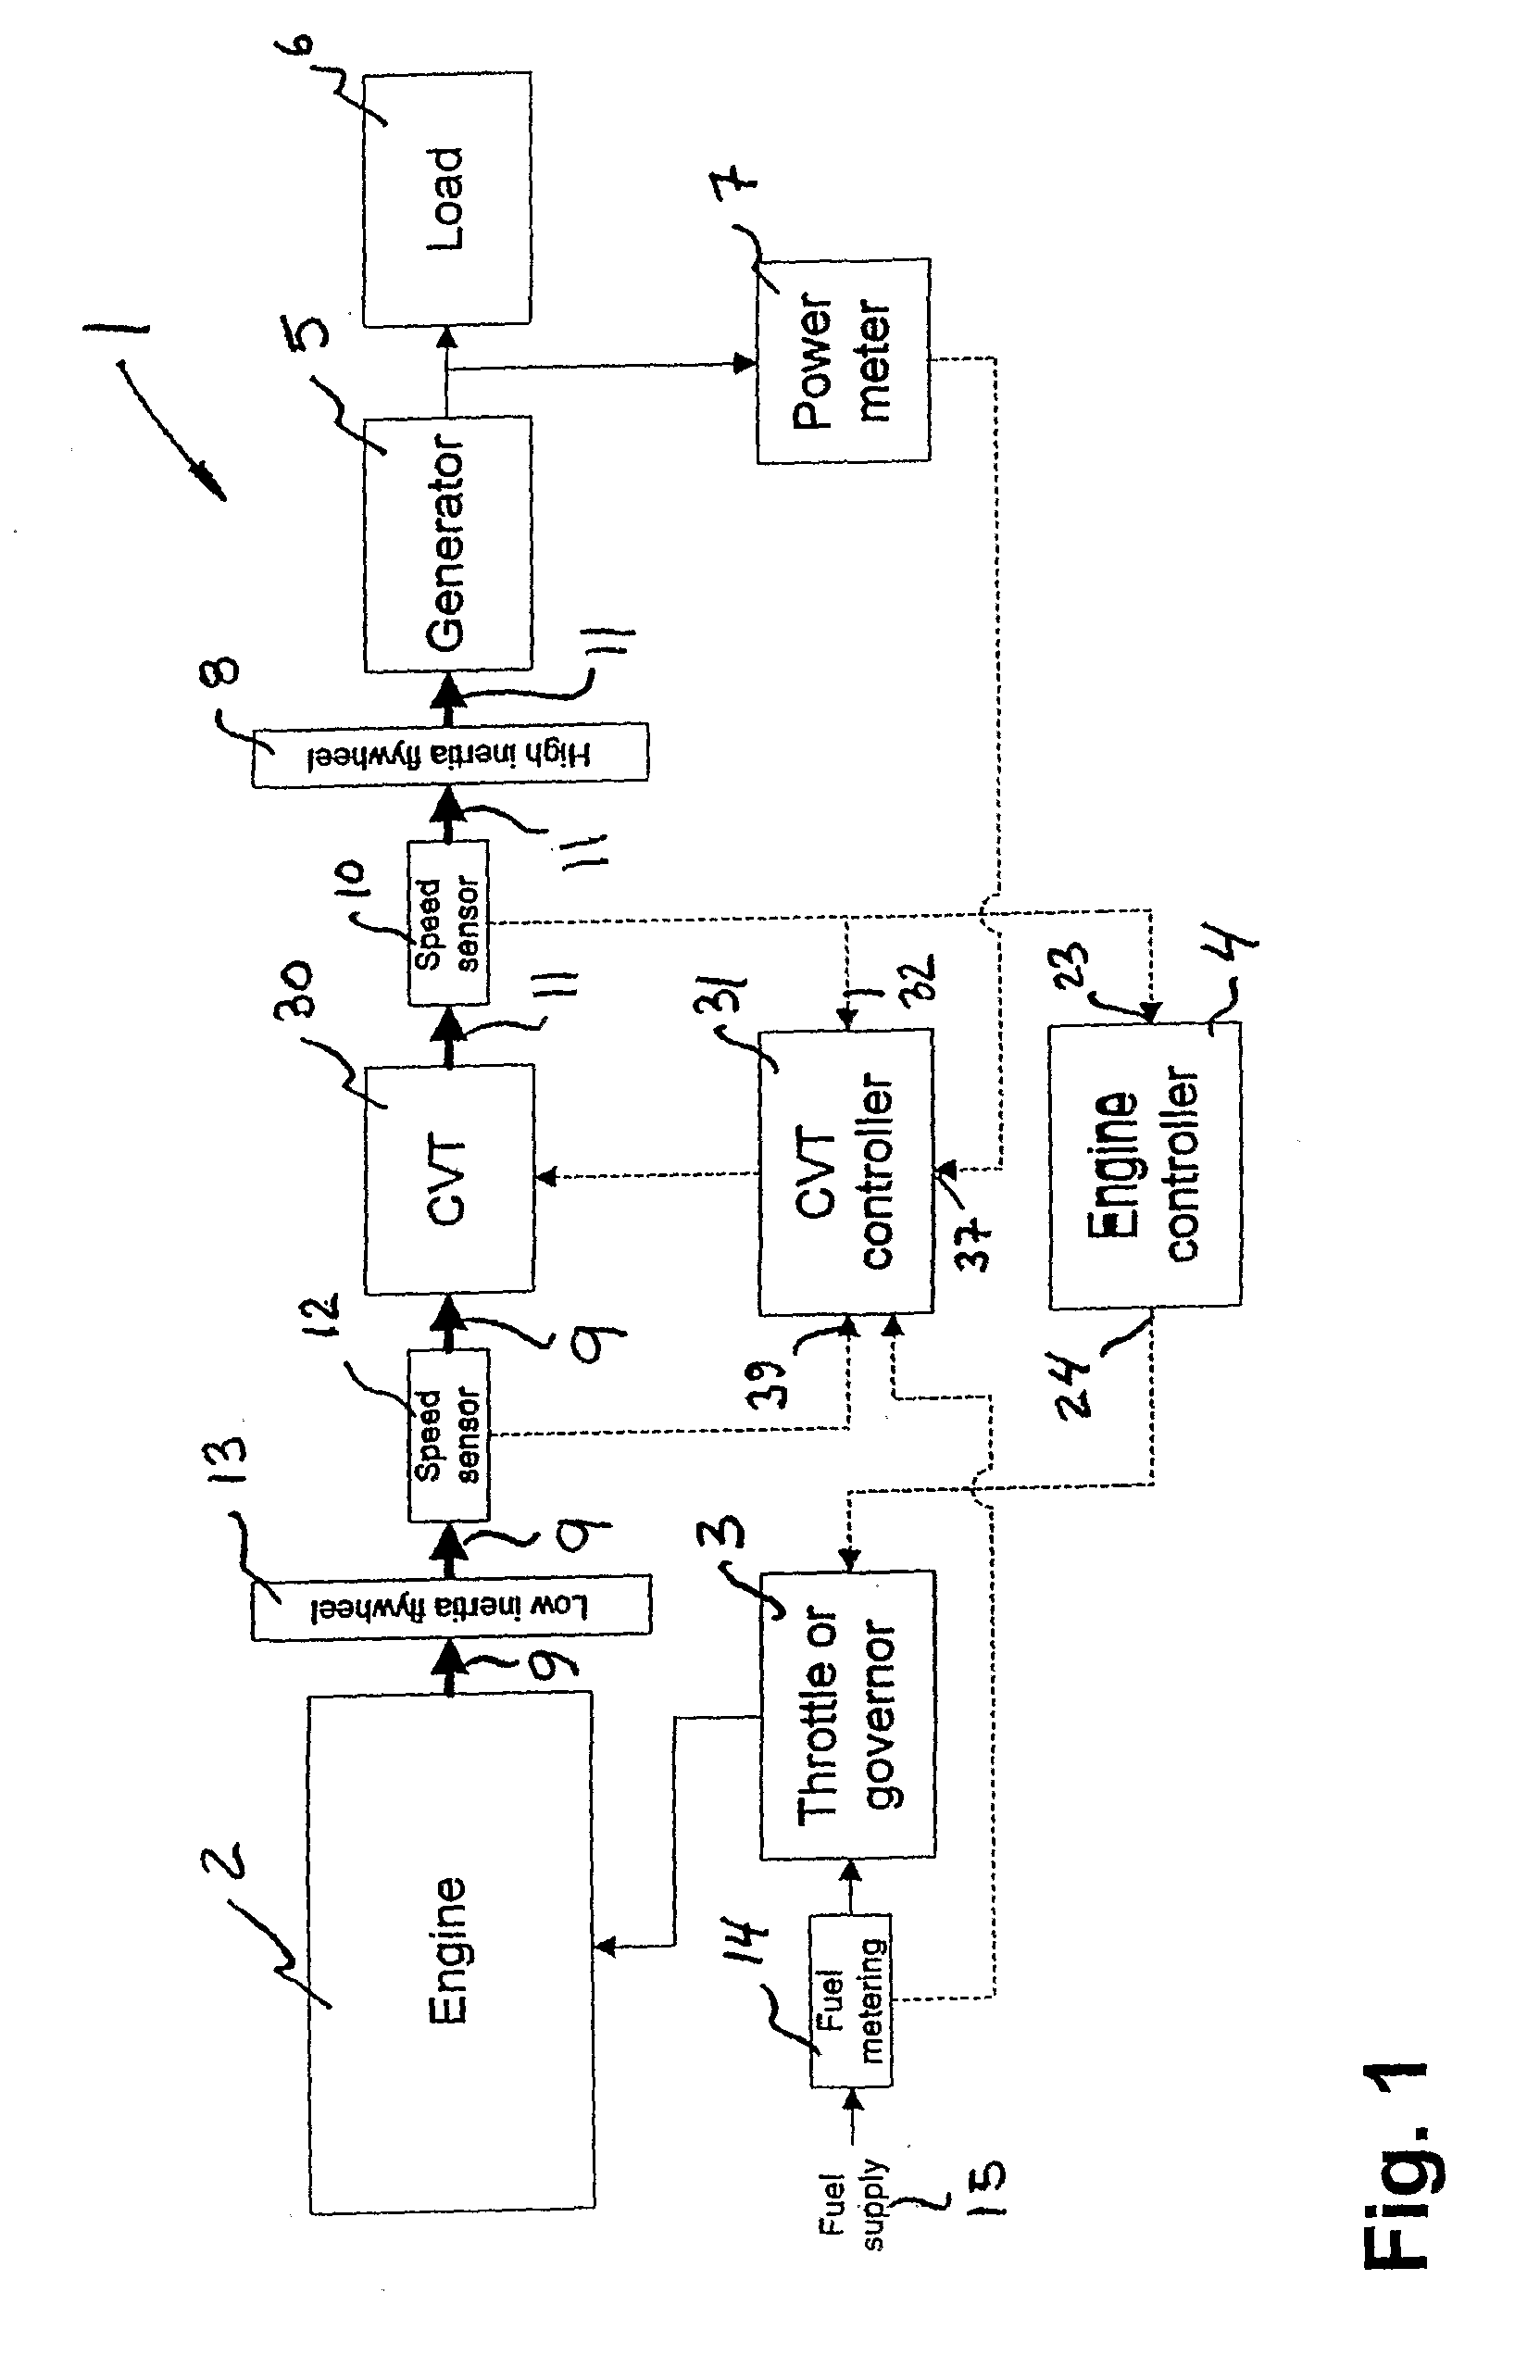 Steady-state and transitory control for transmission between engine and electrical power generator